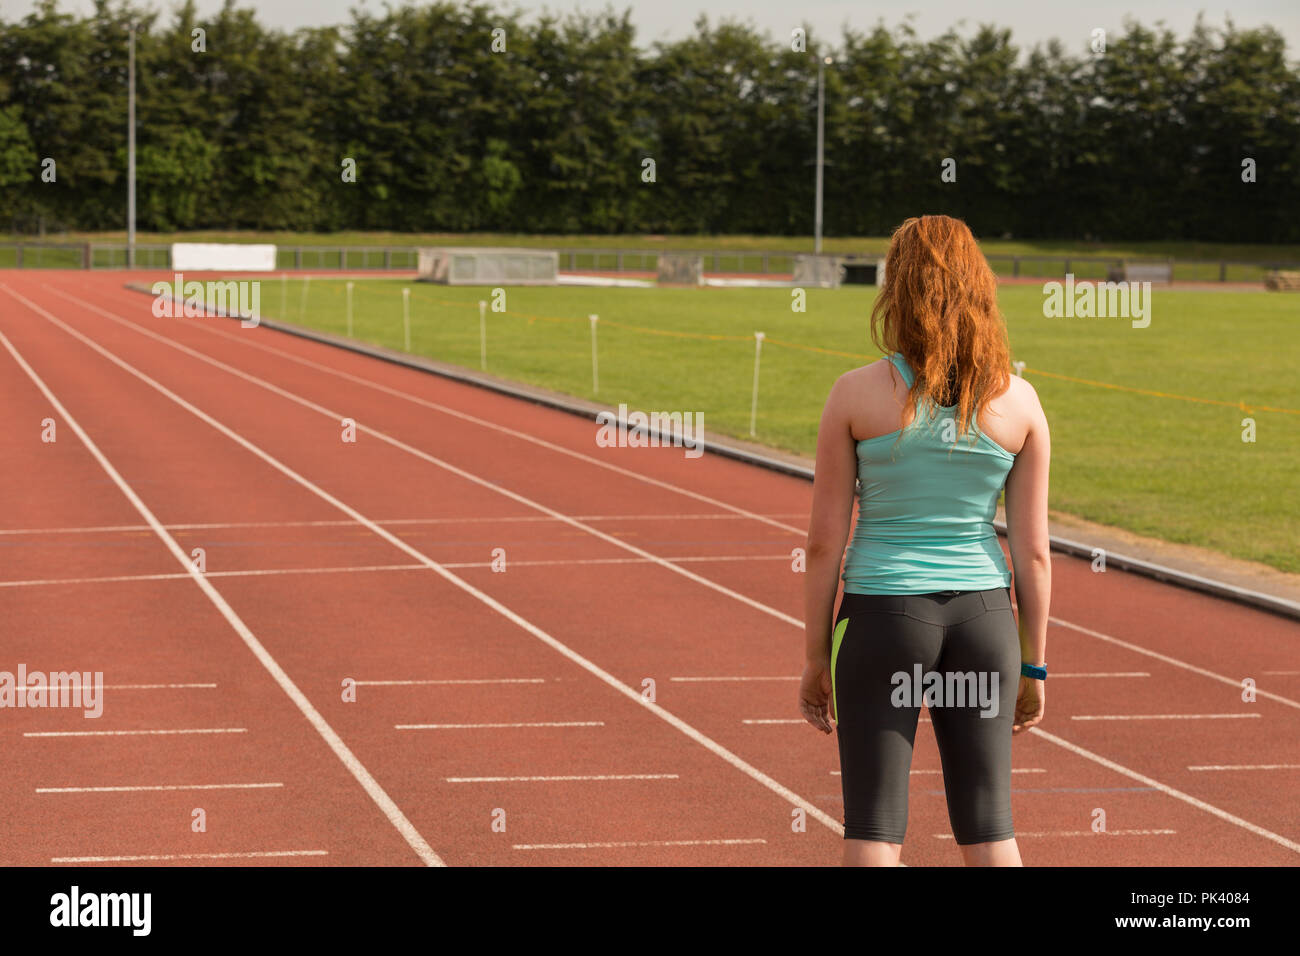 Female athlete standing on sports track Stock Photo